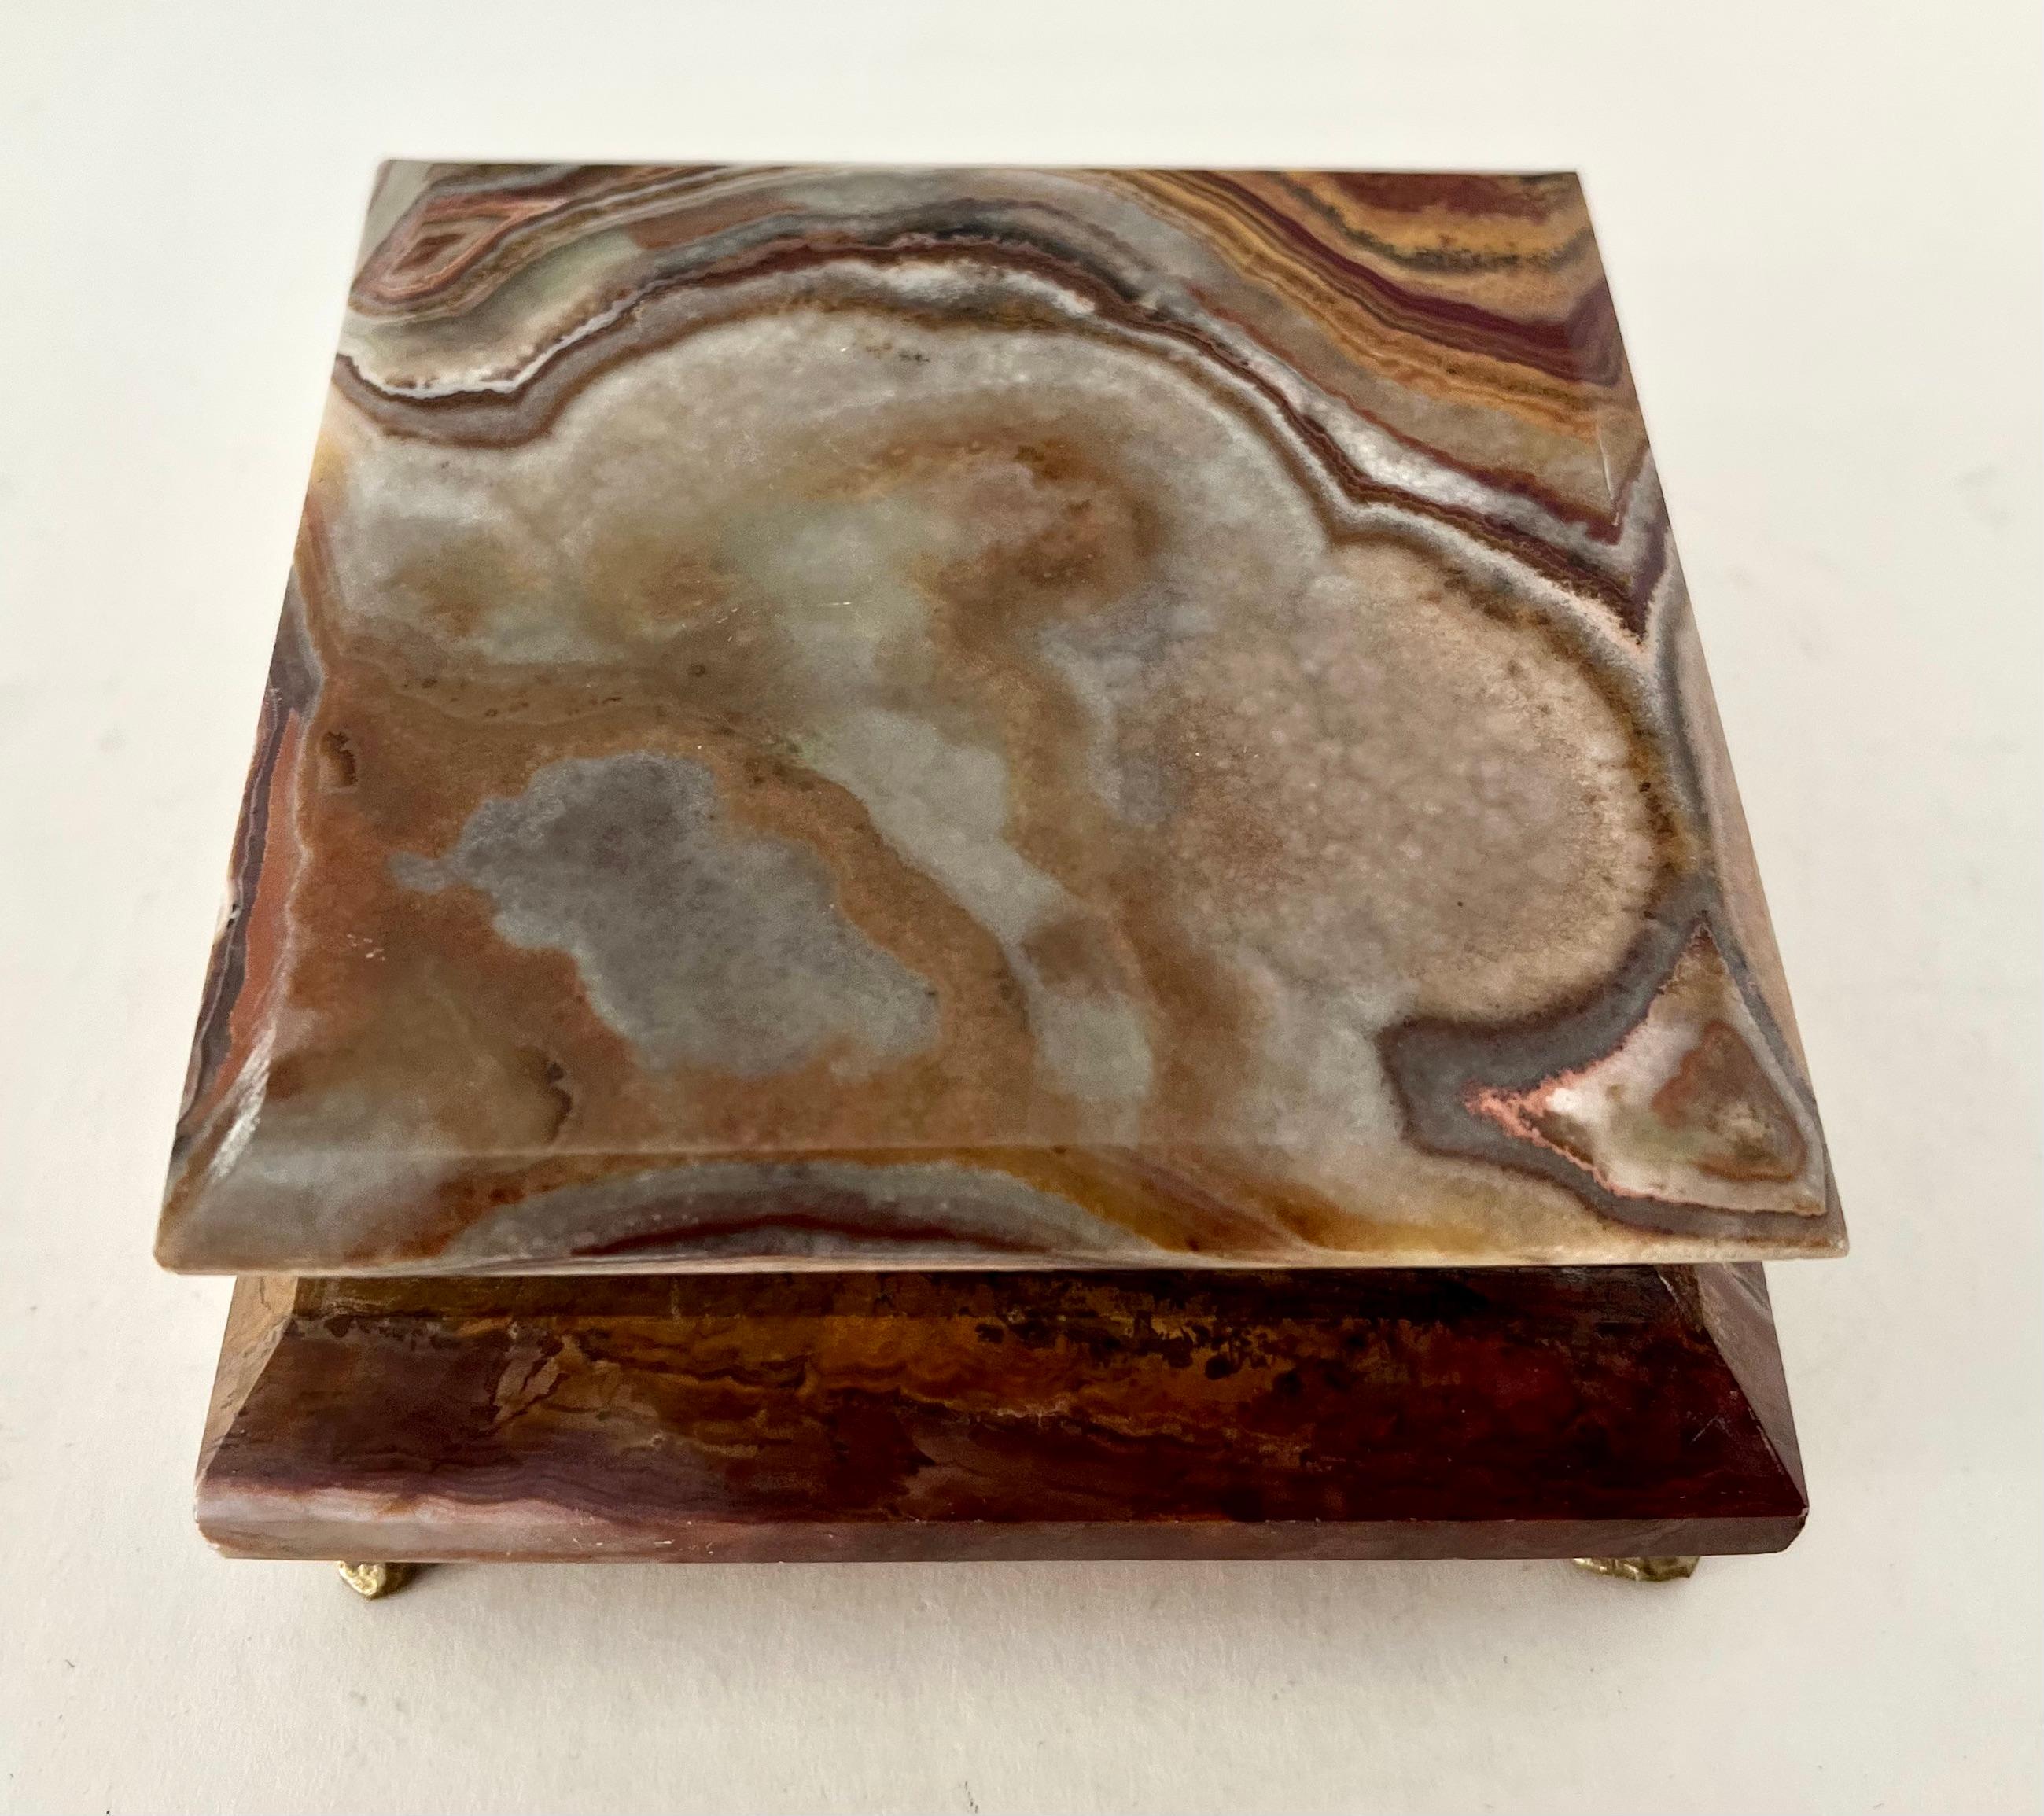 A wonderful Alabaster box, with a closure trimmed in brass and lined in red velvet. The brass paw feet give the hinged box a nice place to rest. 

A compliment to any valet or dressing table, nightstand or cocktail table - to hold things from